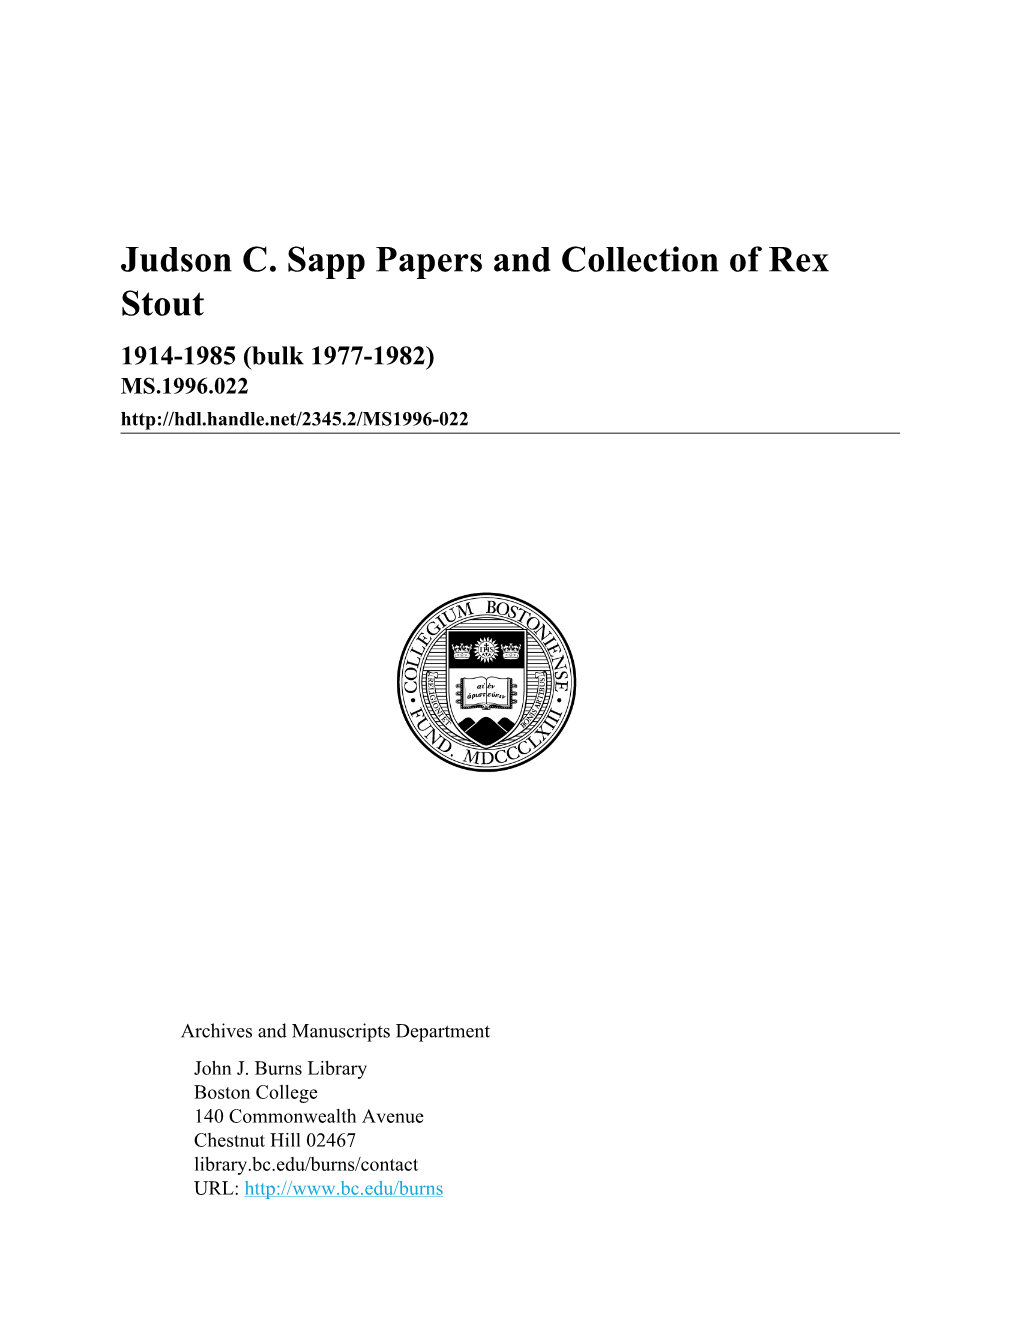 Judson C. Sapp Papers and Collection of Rex Stout 1914-1985 (Bulk 1977-1982) MS.1996.022